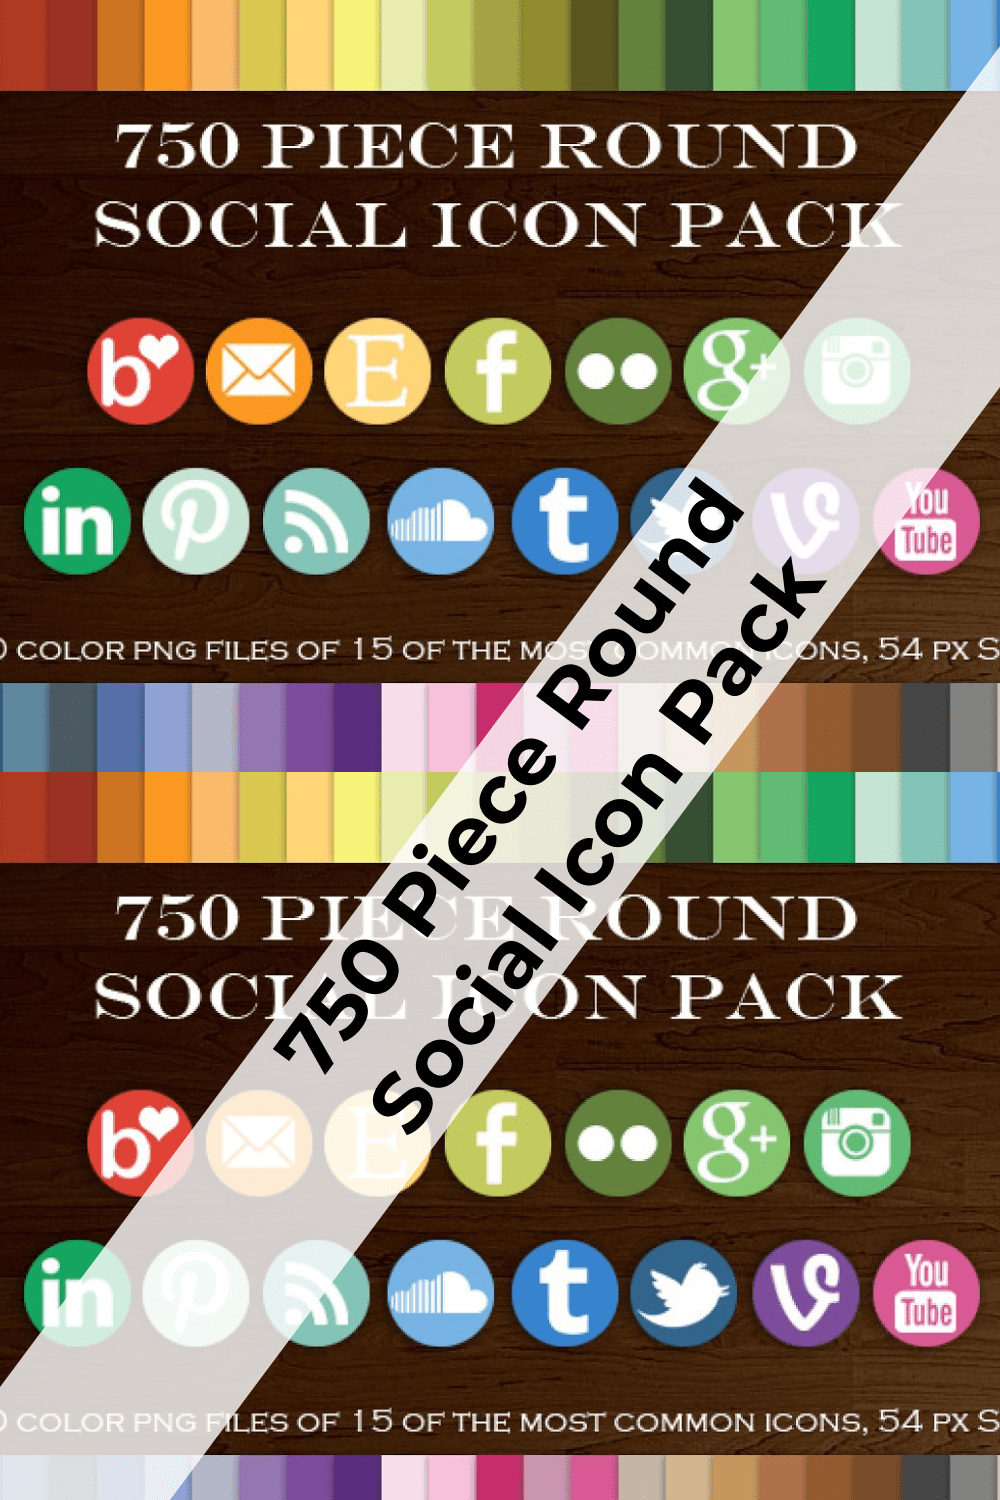 750 Piece Round Social Icon Pack Pinterest.